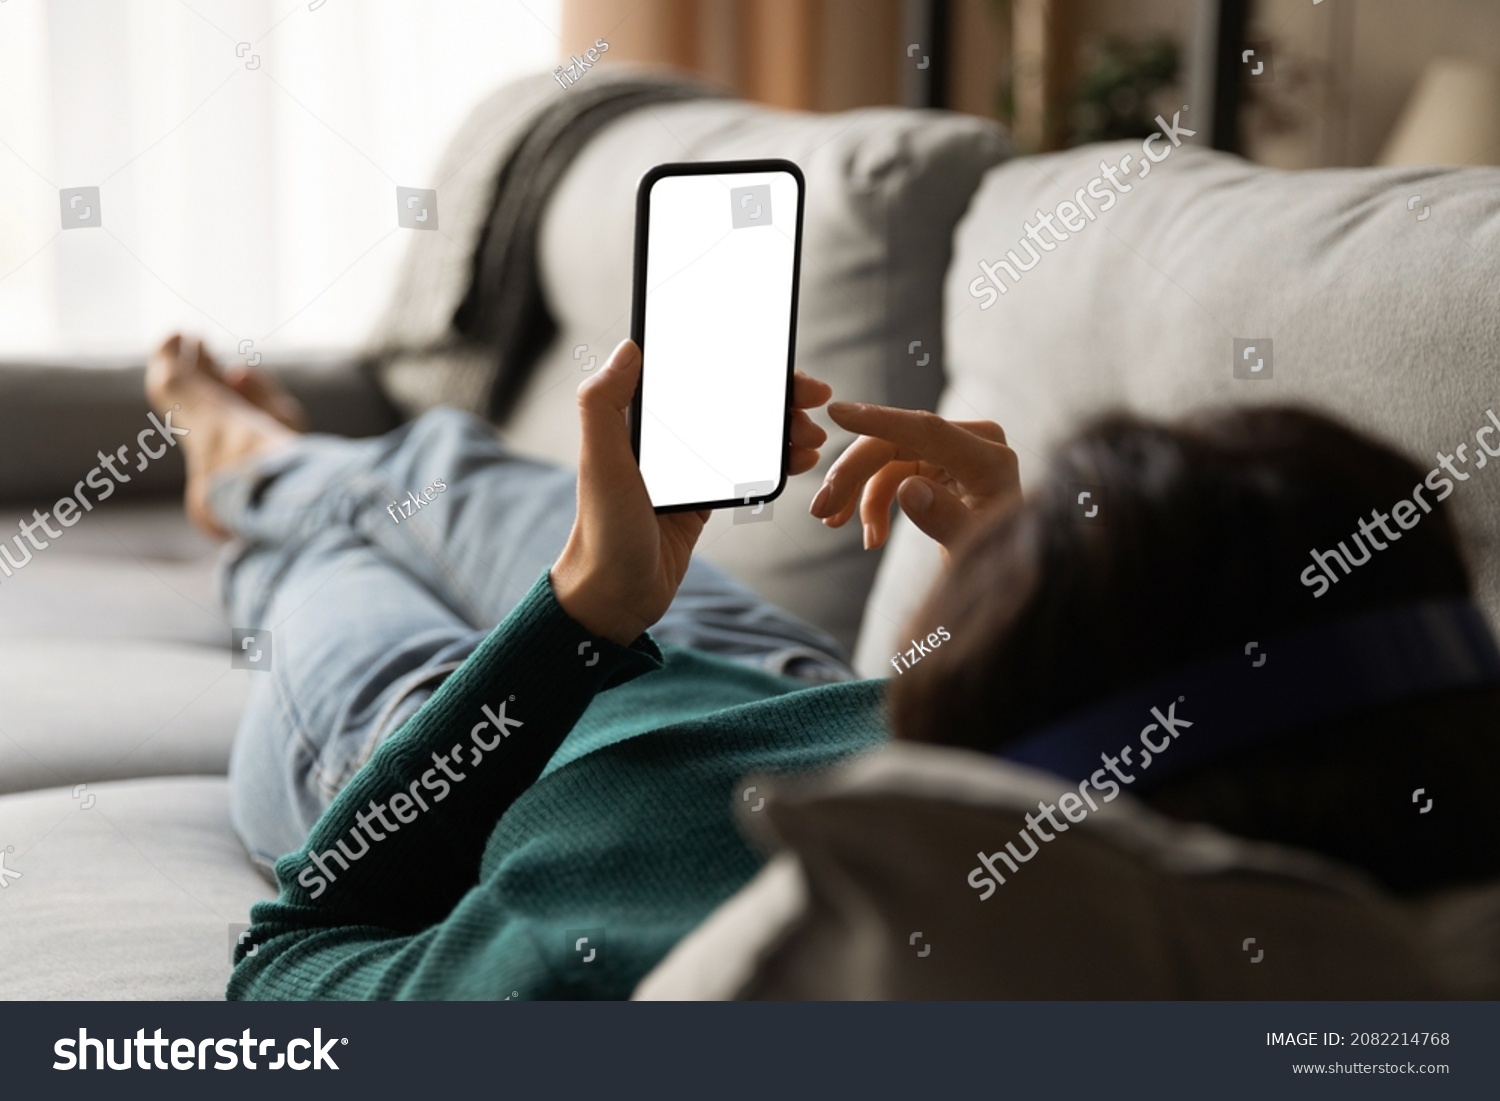 Female using phone. Over shoulder view of young woman lying on sofa hold smartphone with blank empty screen. Template for web app chat interface online advertisement mobile game social network profile #2082214768